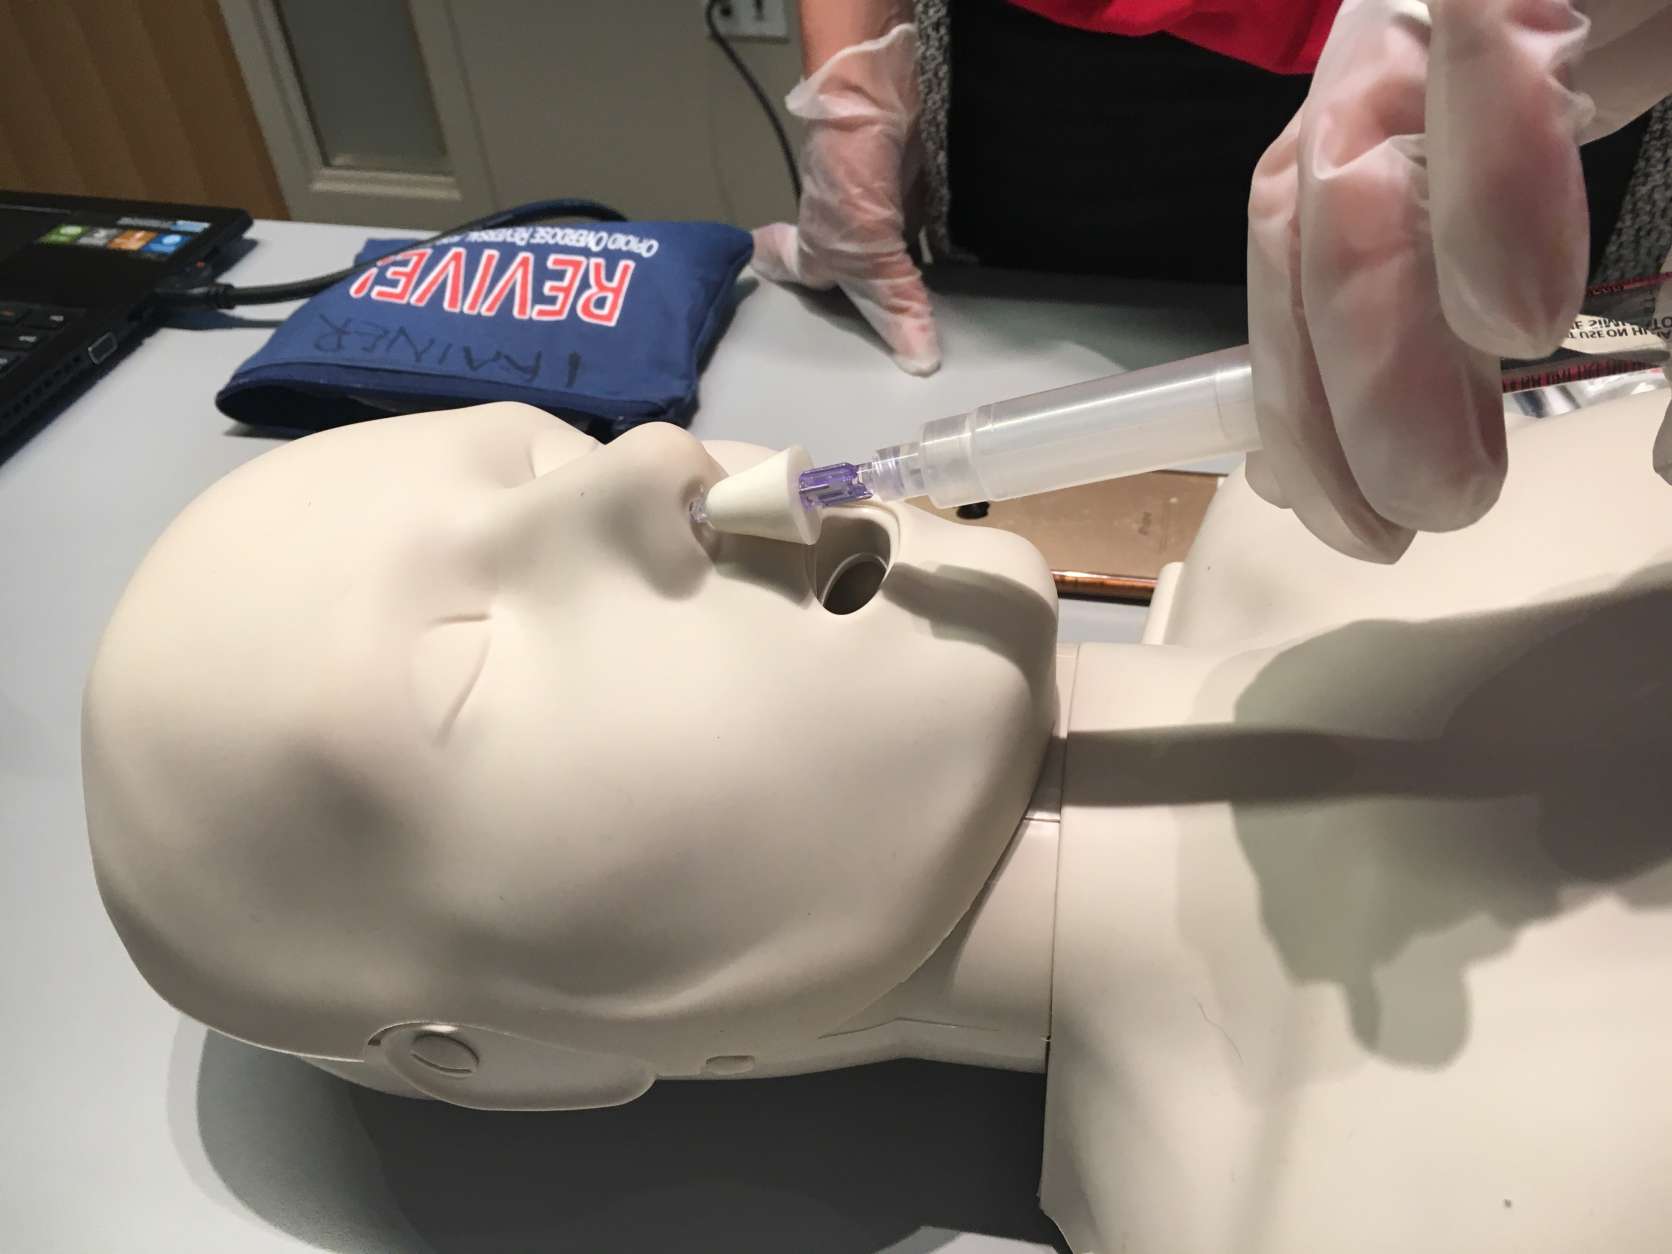 Ginny uses a dummy to illustrate pumping two doses of naloxone into the victim's nose. (WTOP/Jamie Forzato)